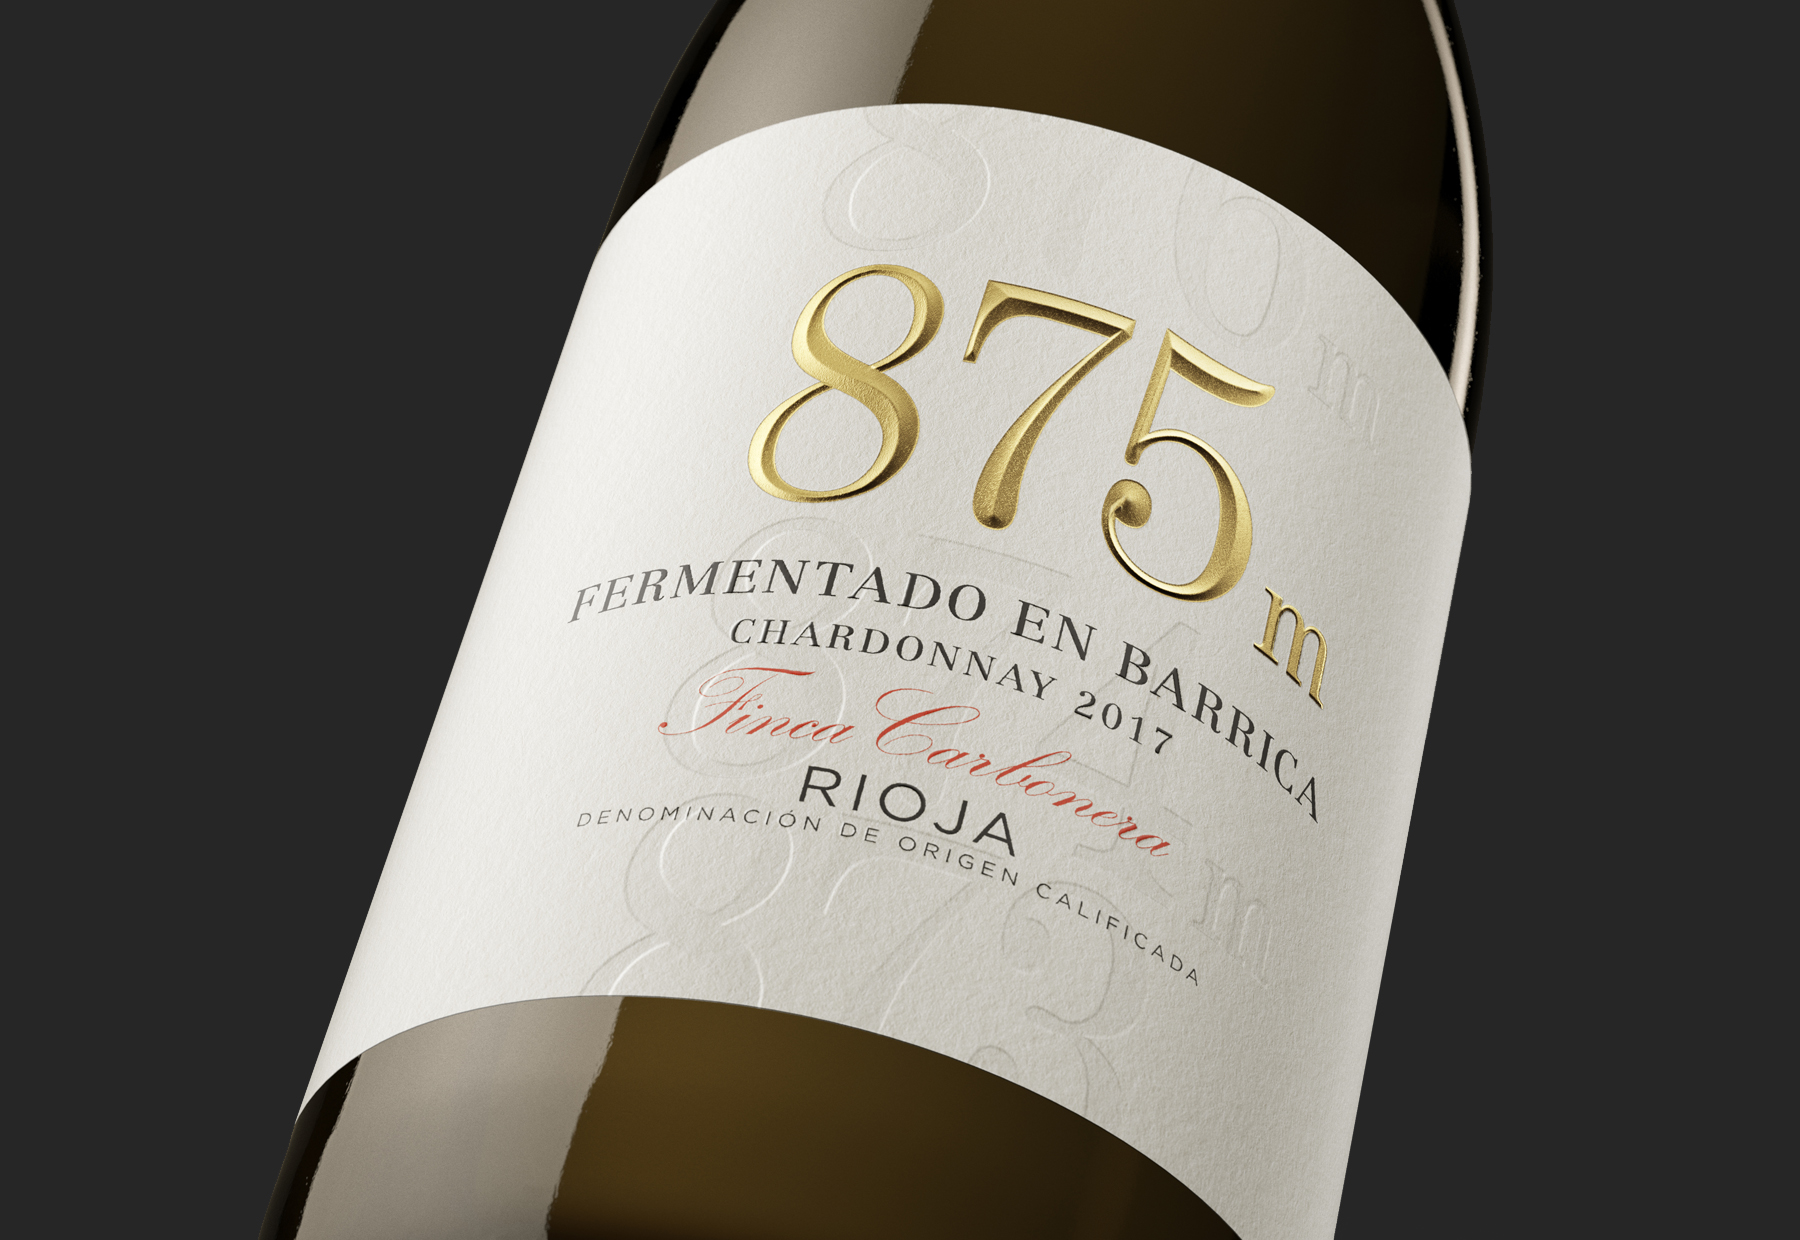 875m, the Height of White Wines, by Moruba